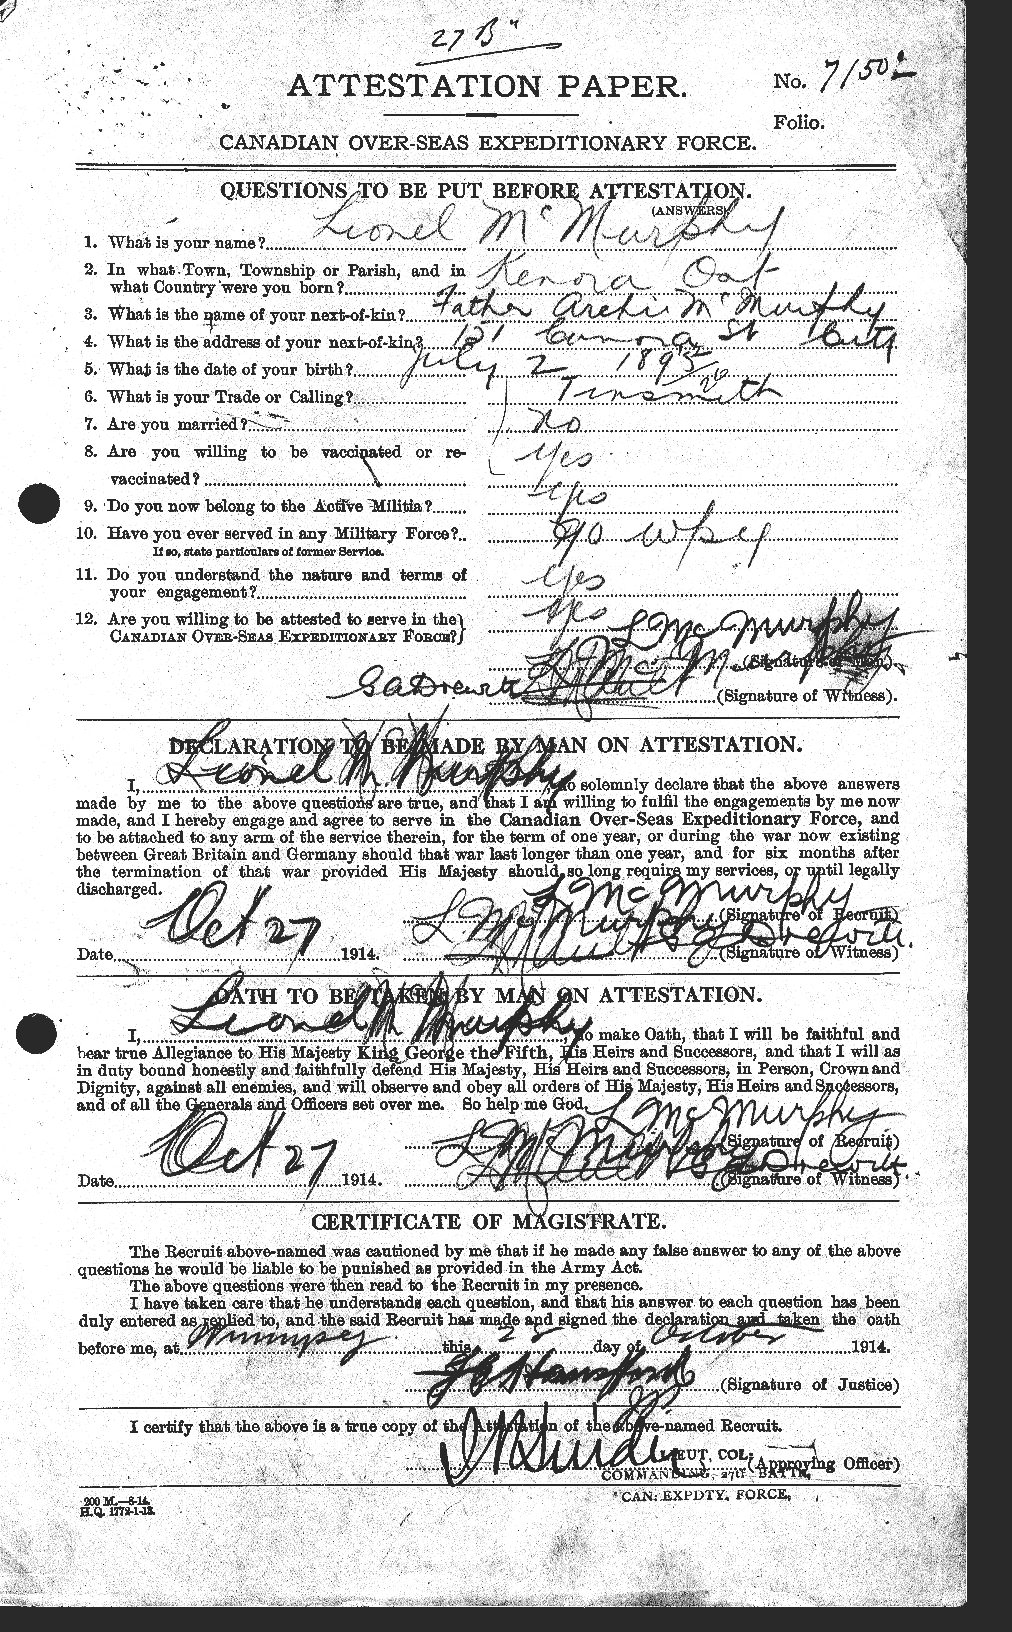 Personnel Records of the First World War - CEF 539396a